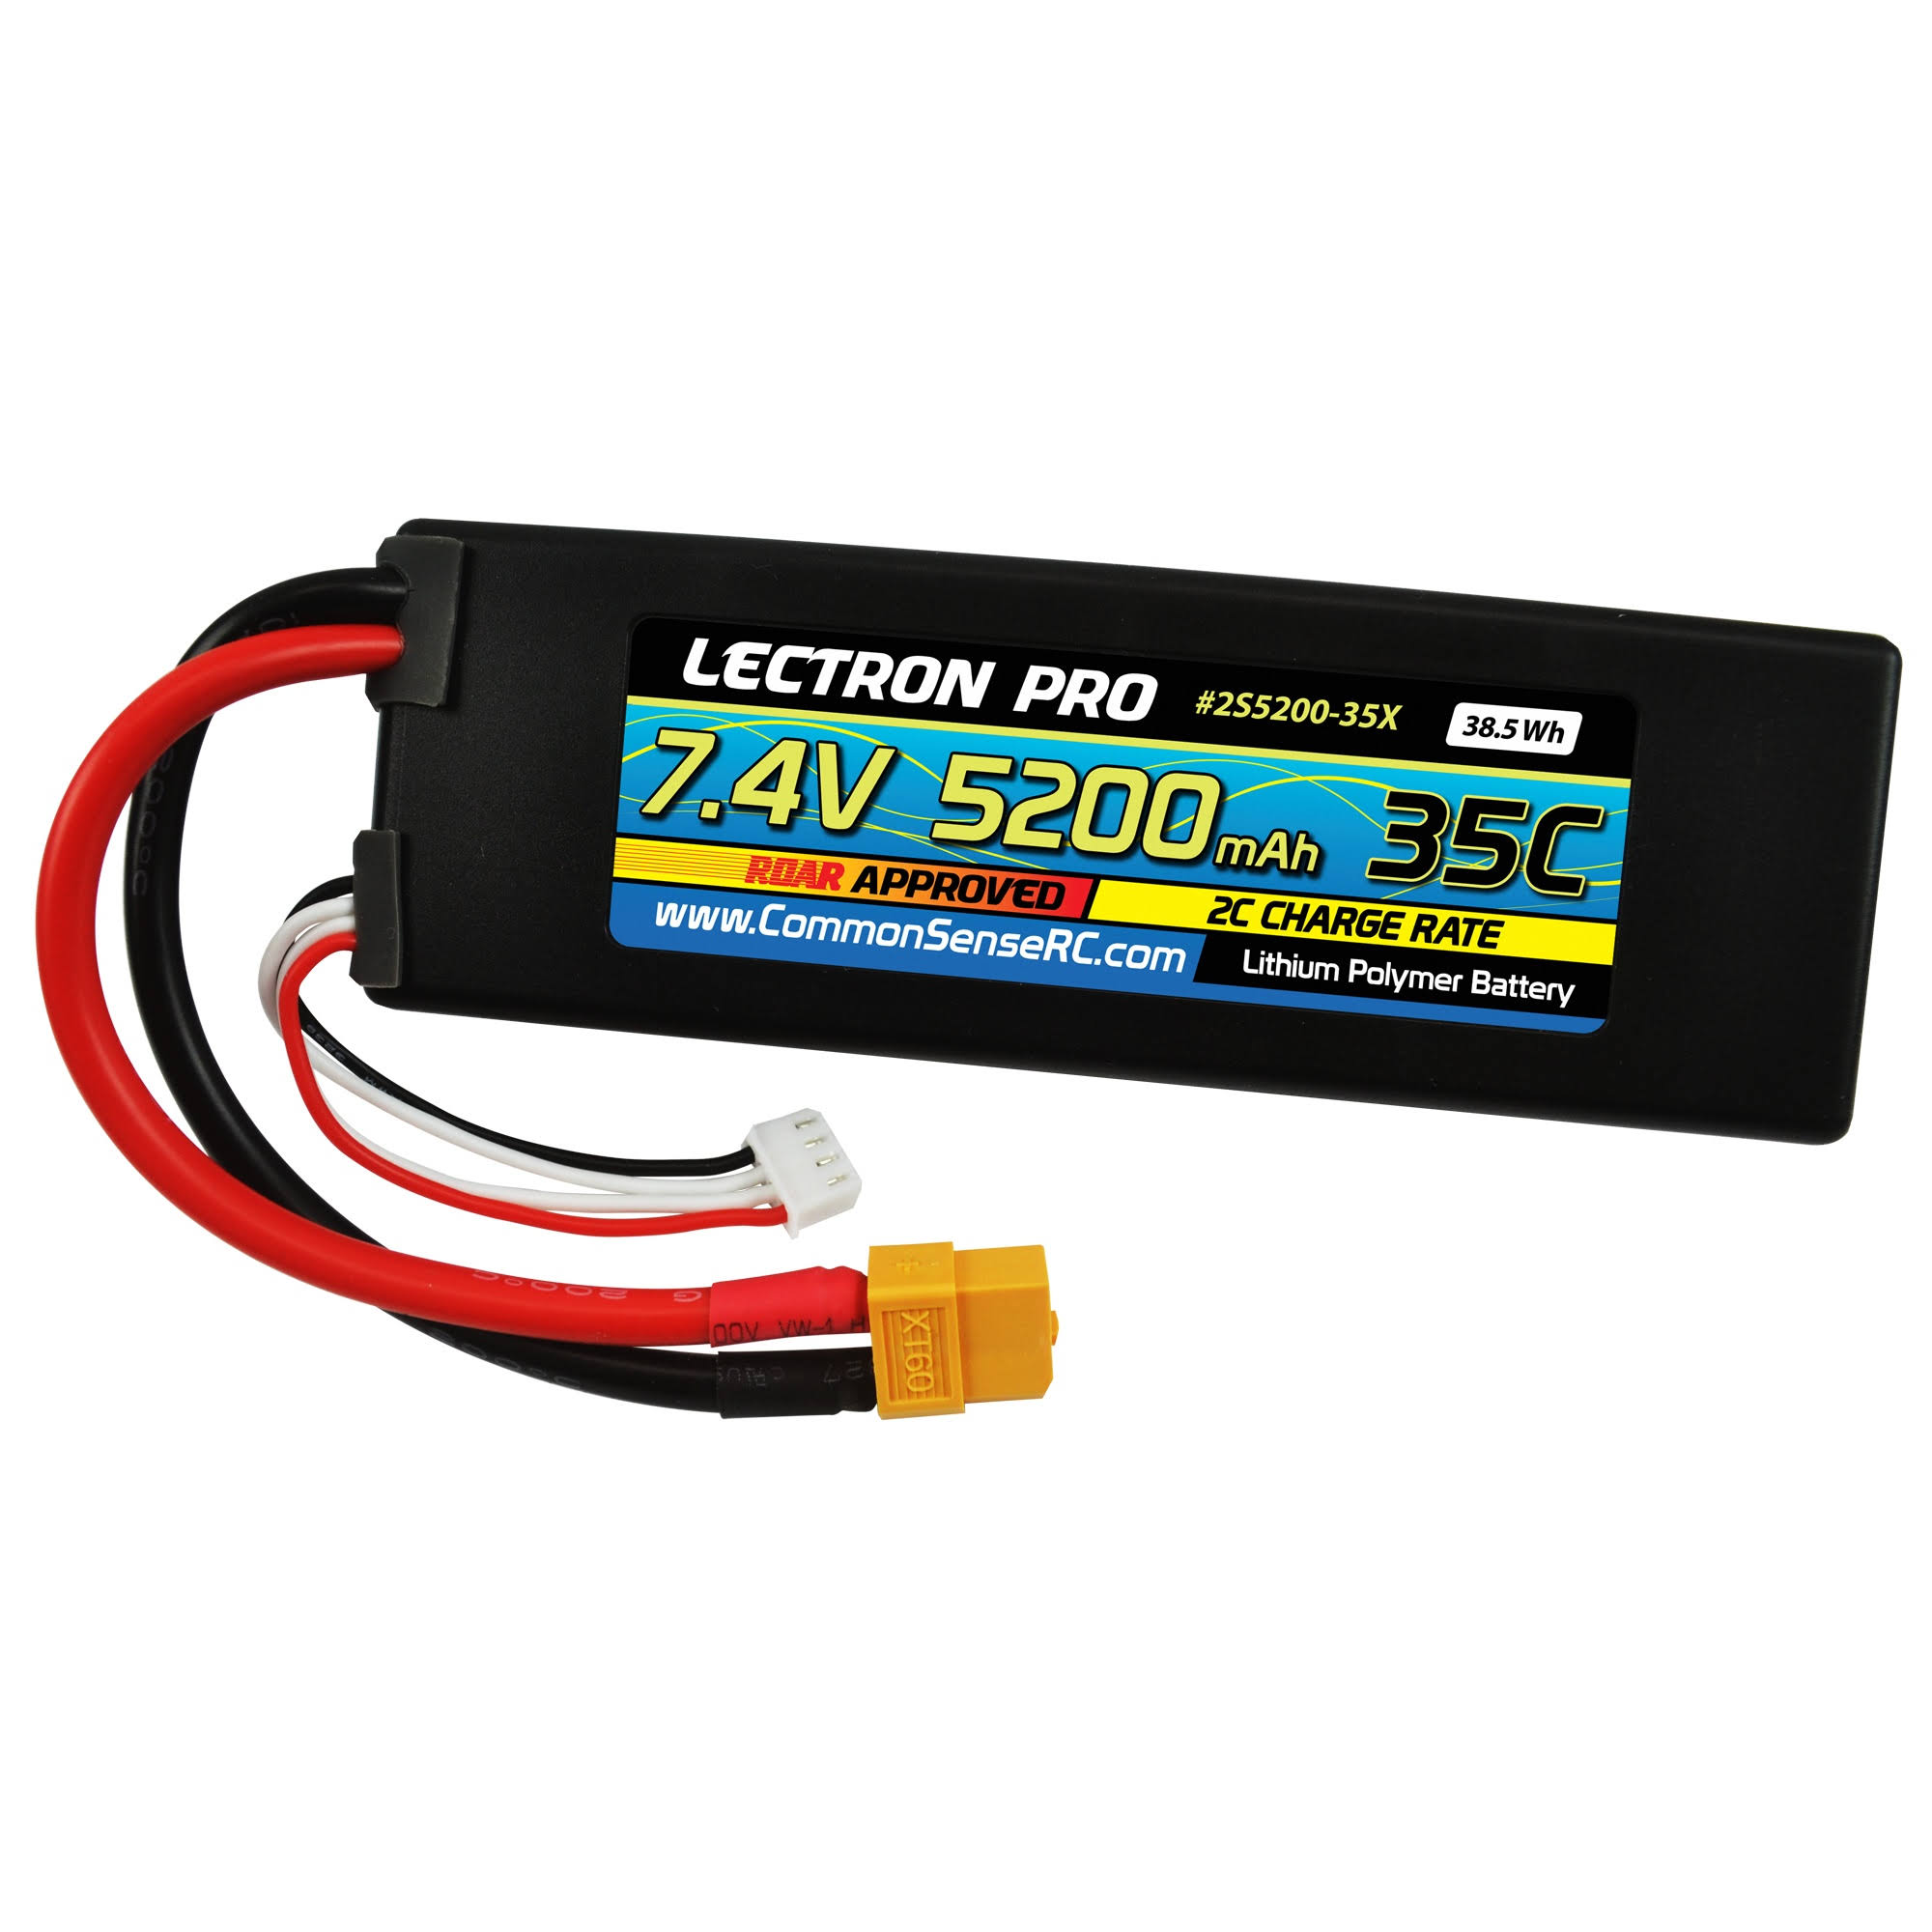 Lectron Pro 7.4V 5200mAh 35C Lipo Battery with XT60 Connector